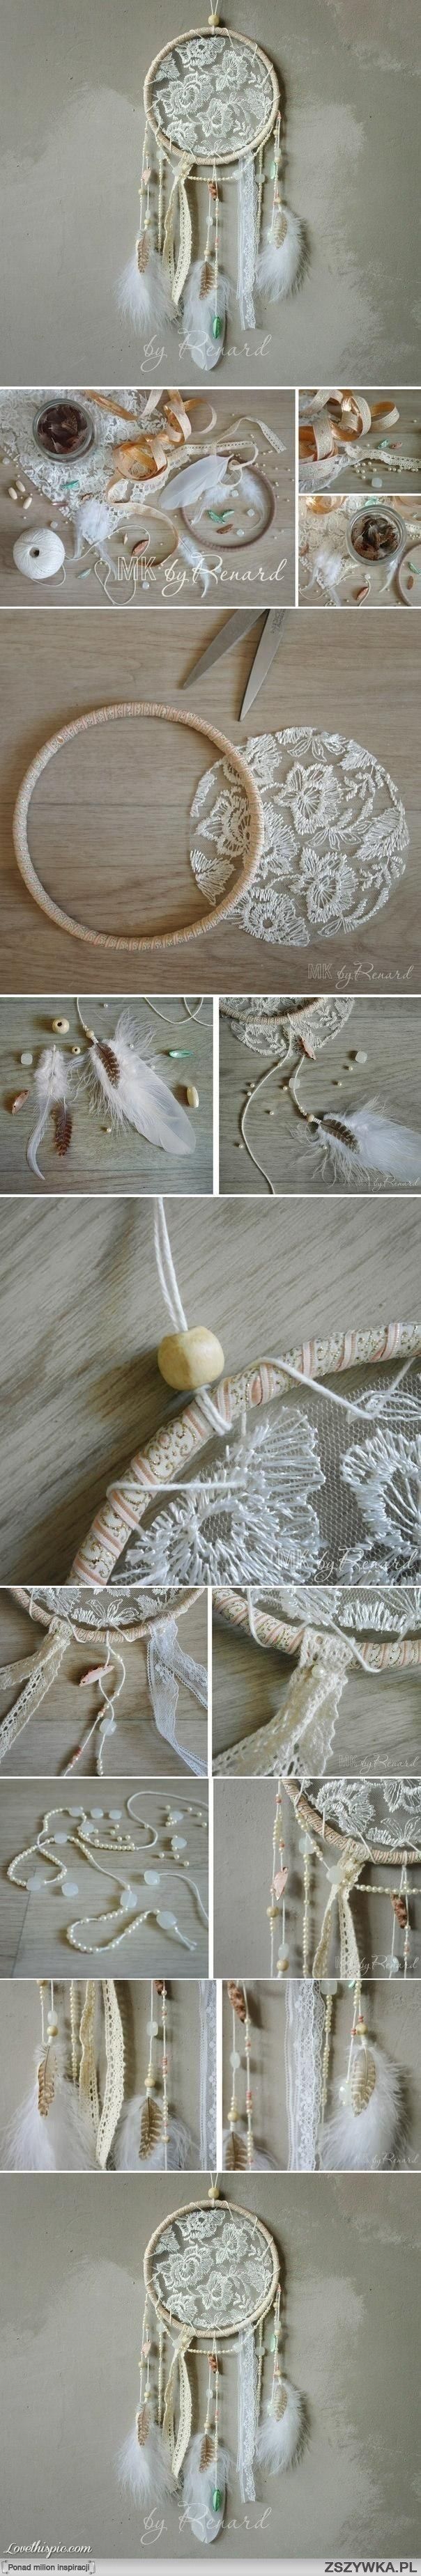 Step by step how to make a lace dreamcatcher.